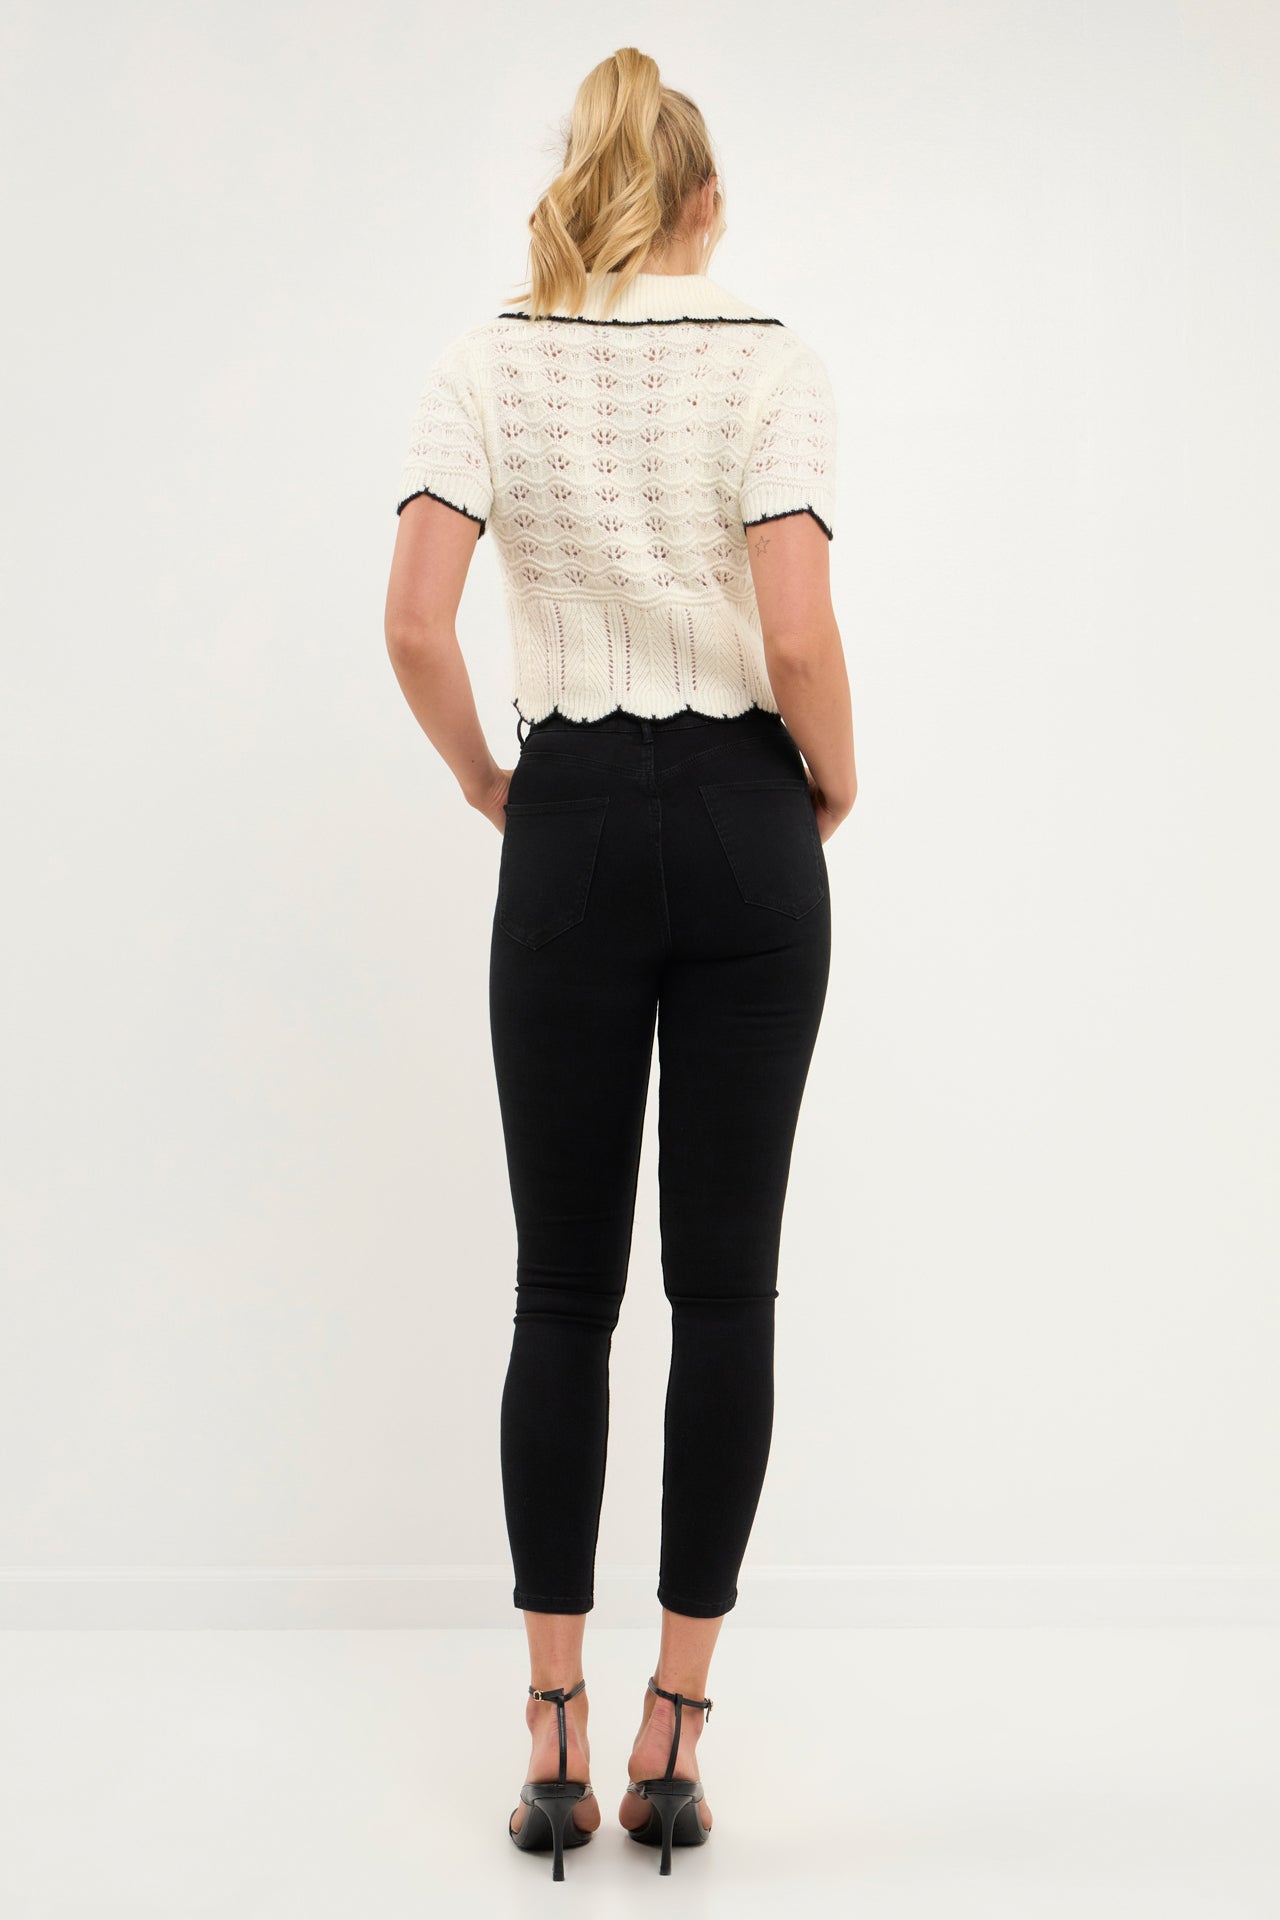 ENDLESS ROSE - Short Puff Sleeve Scalloped Knit Top - SWEATERS & KNITS available at Objectrare